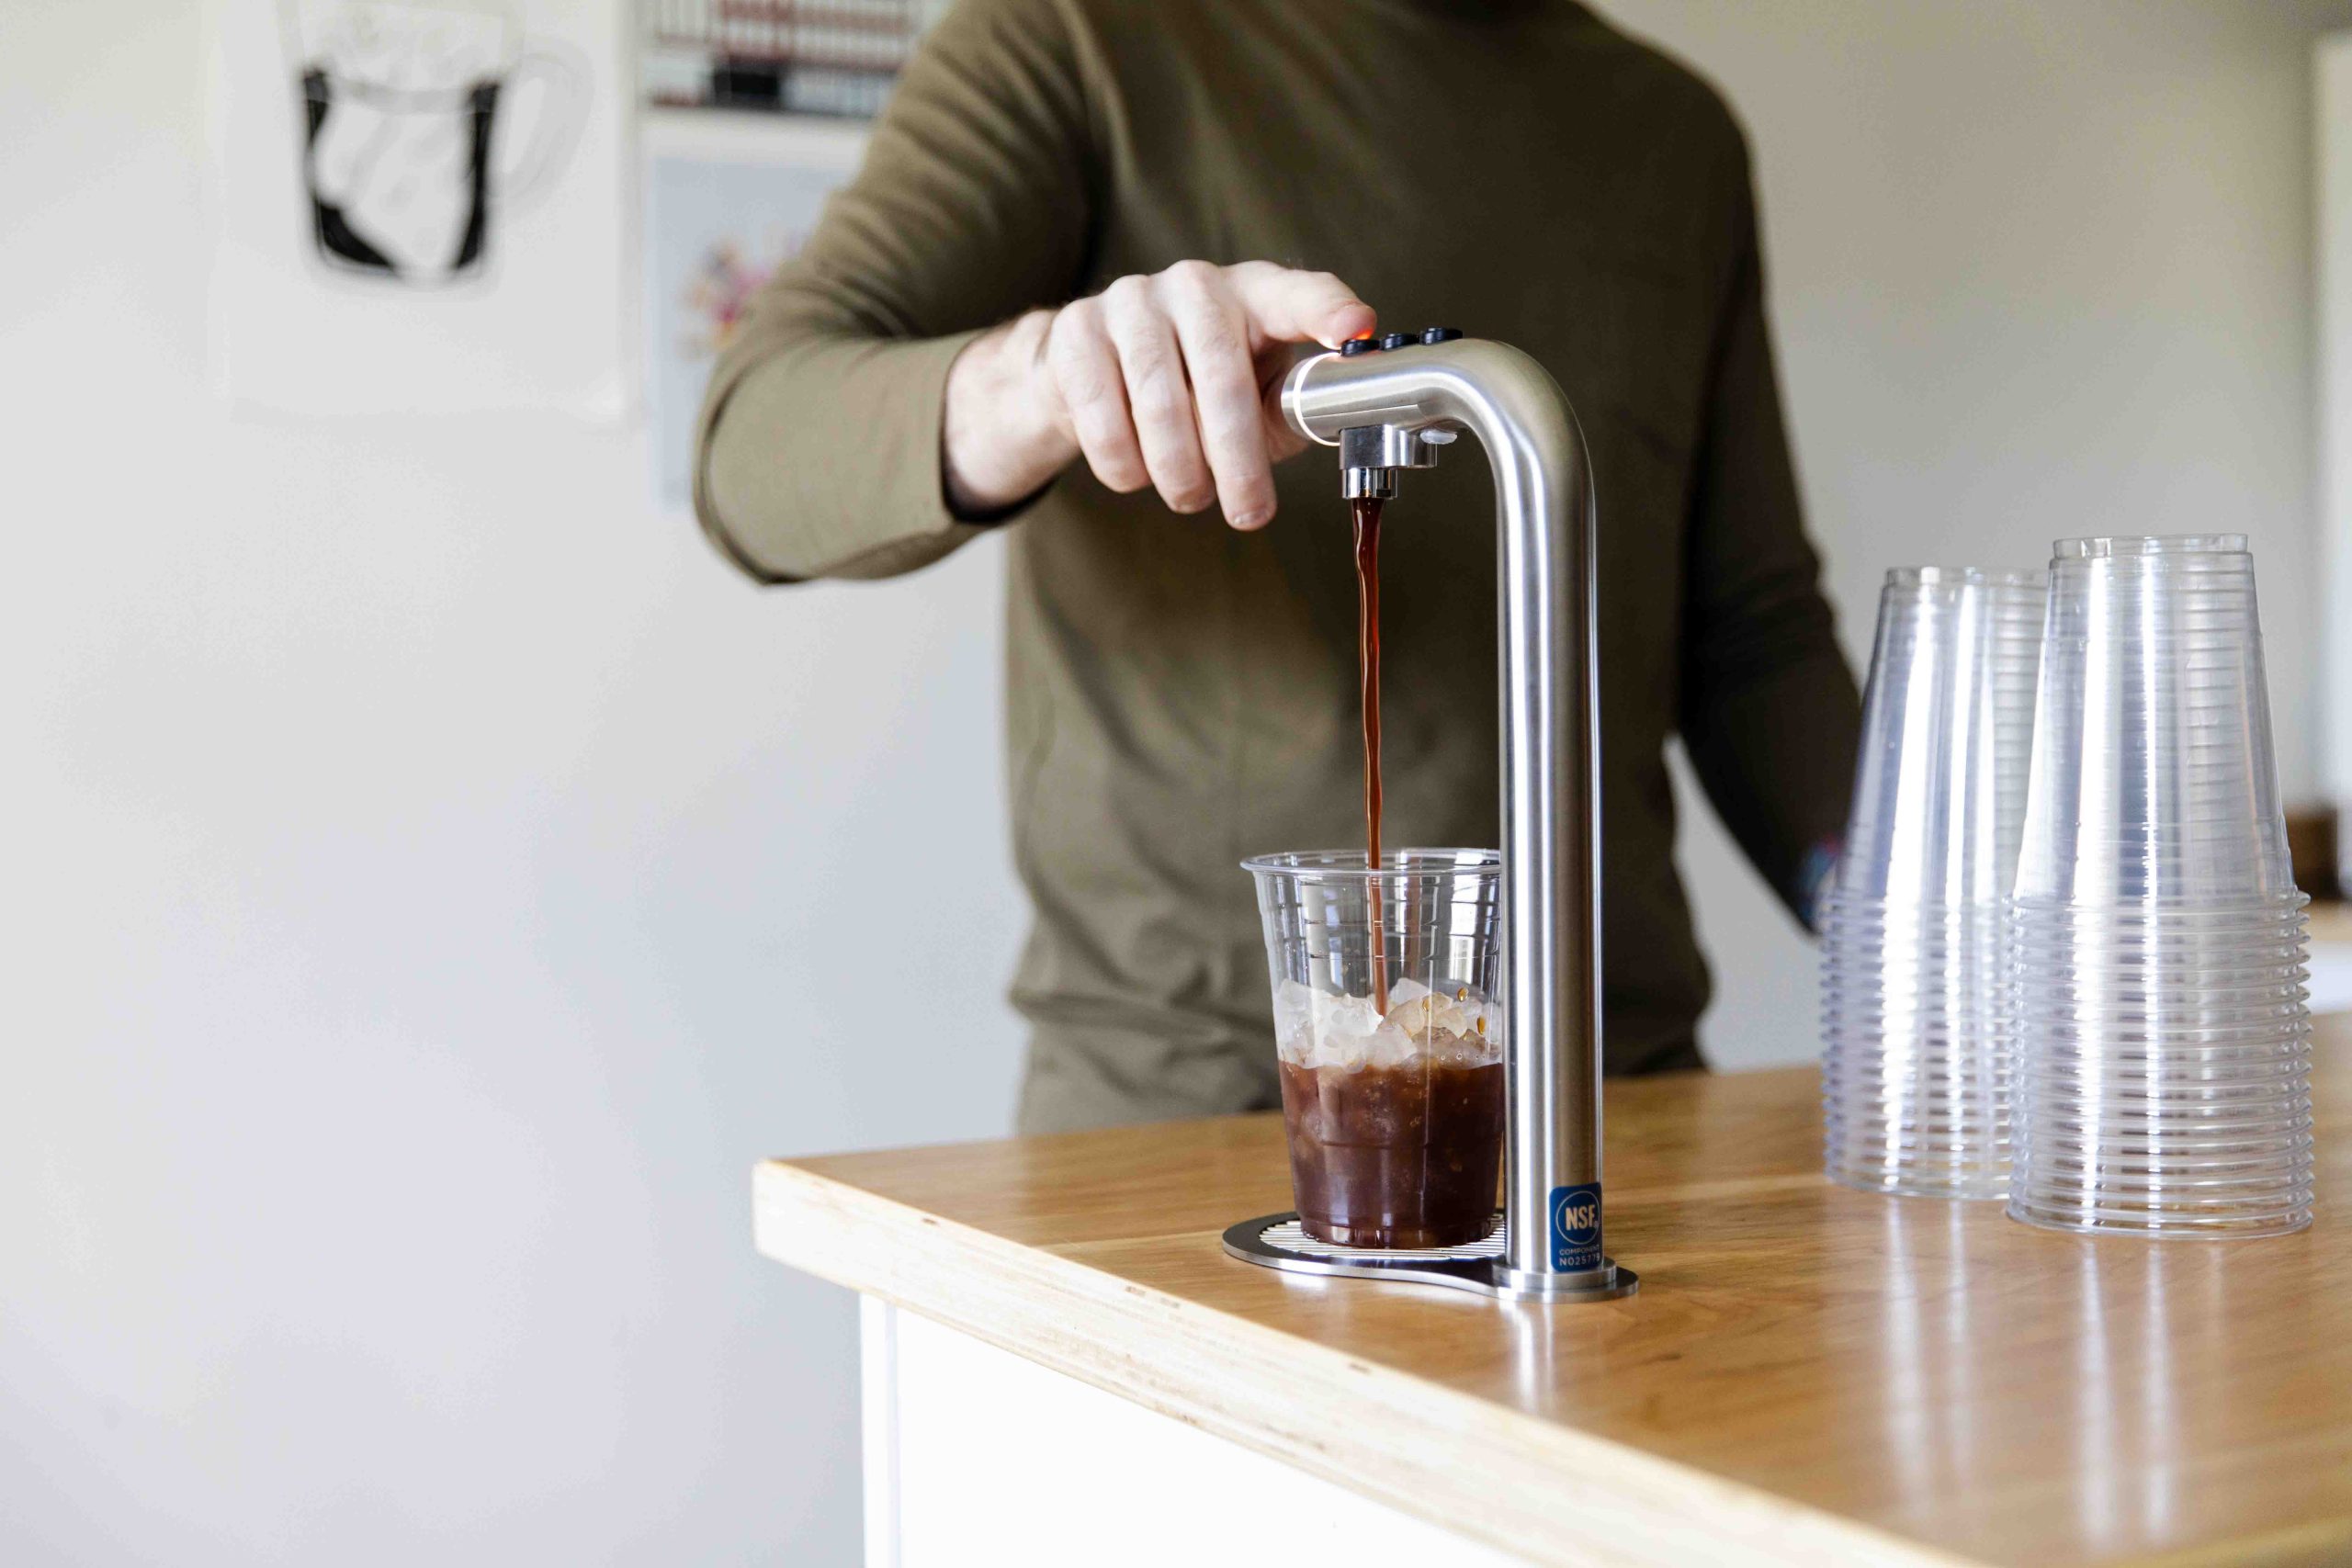 Marco Pour’d System Now Available at Prima Coffee Equipment